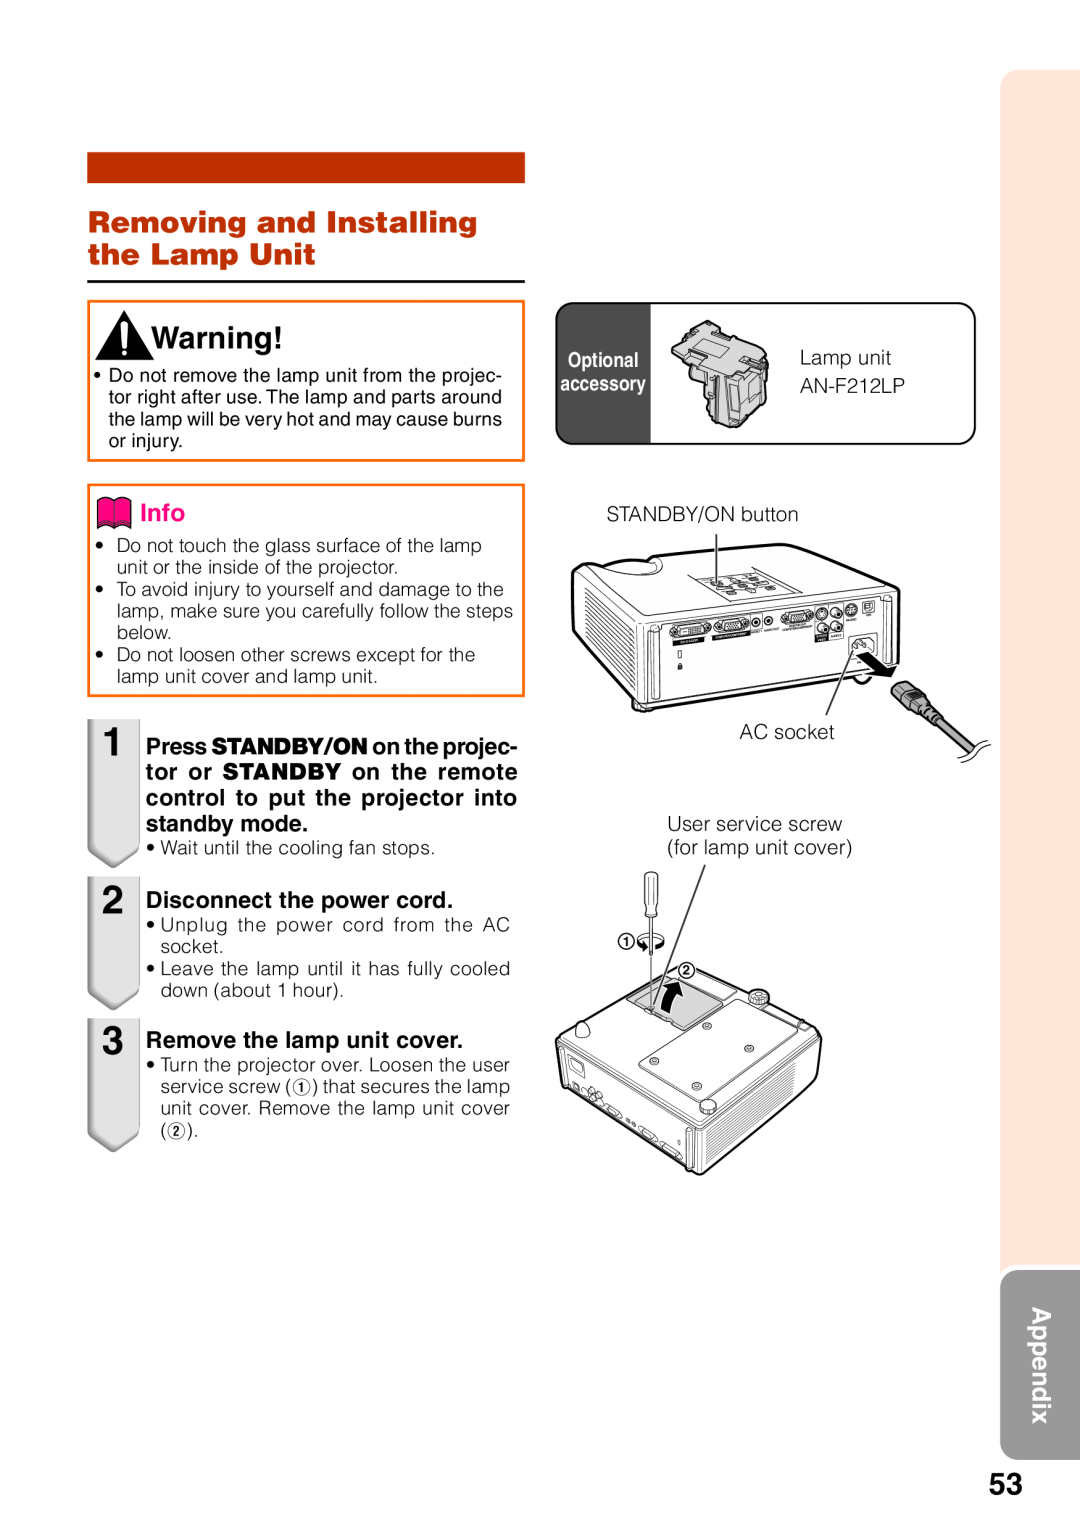 Sharp XR-32X Removing and Installing the Lamp Unit, Info, Appendix, Disconnect the power cord, Remove the lamp unit cover 